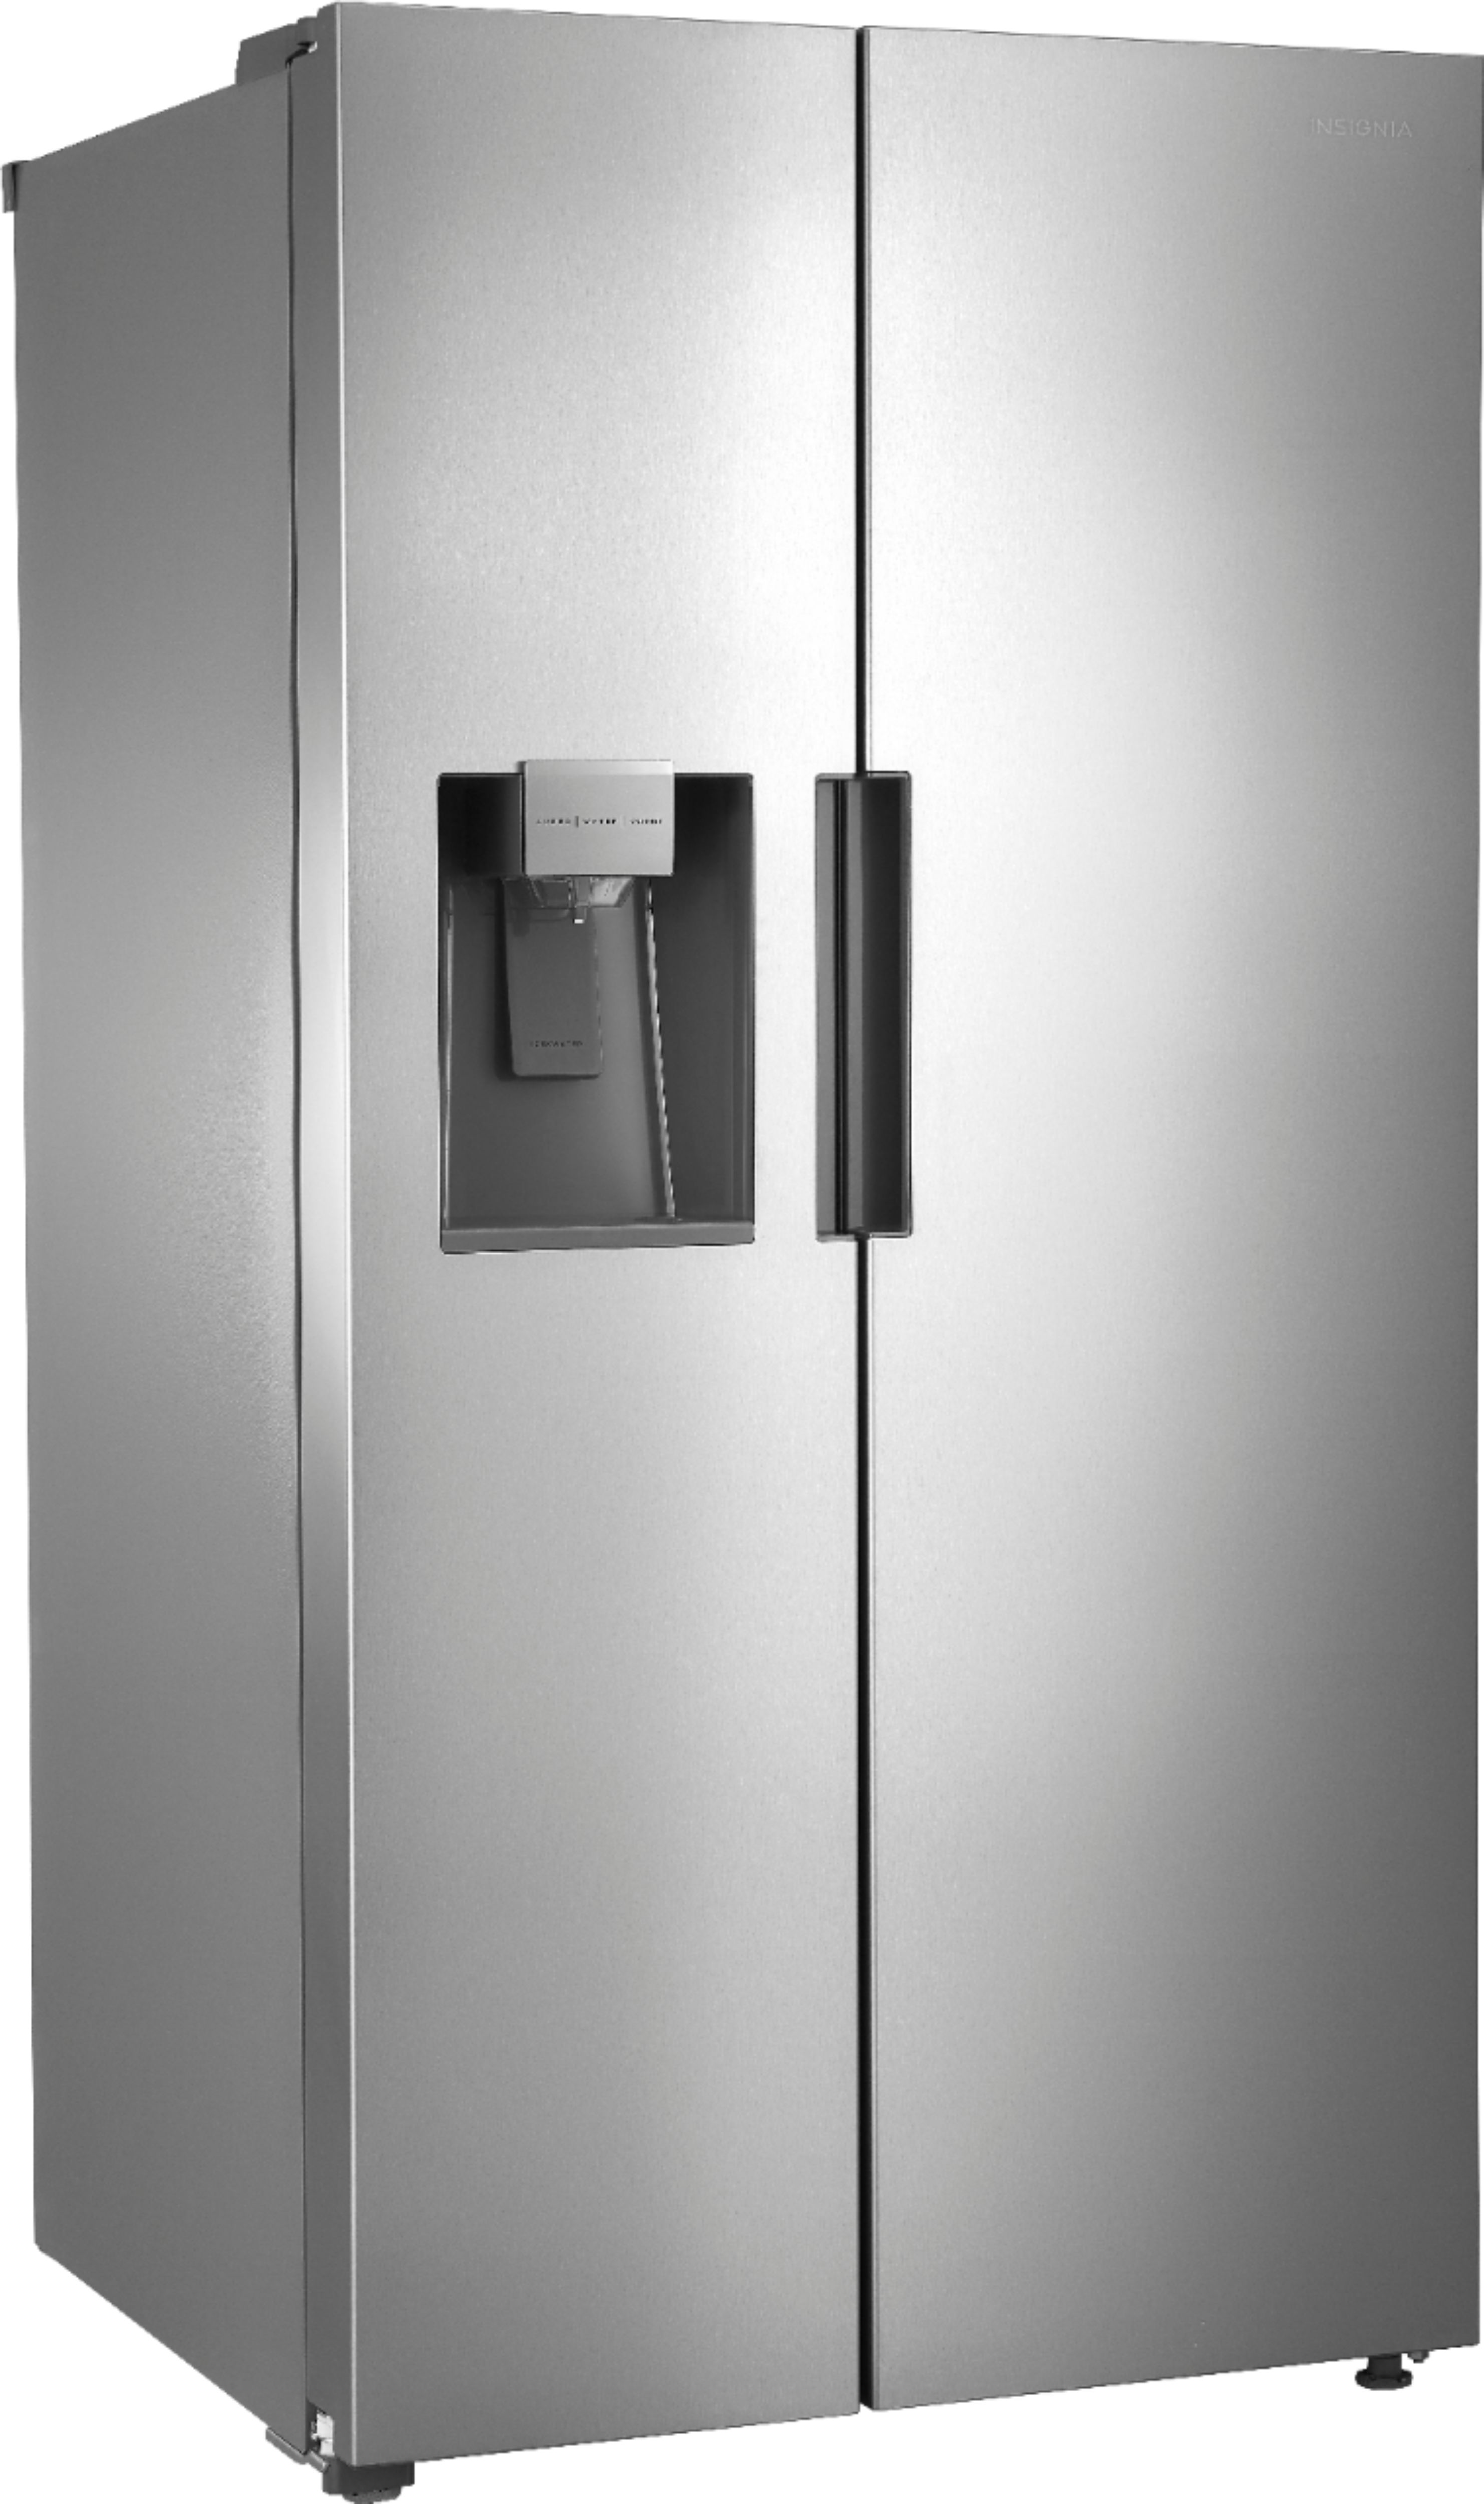 Angle View: Frigidaire - Gallery 22.4 Cu. Ft. French Door Counter-Depth Refrigerator - Smudge-Proof® Stainless Steel